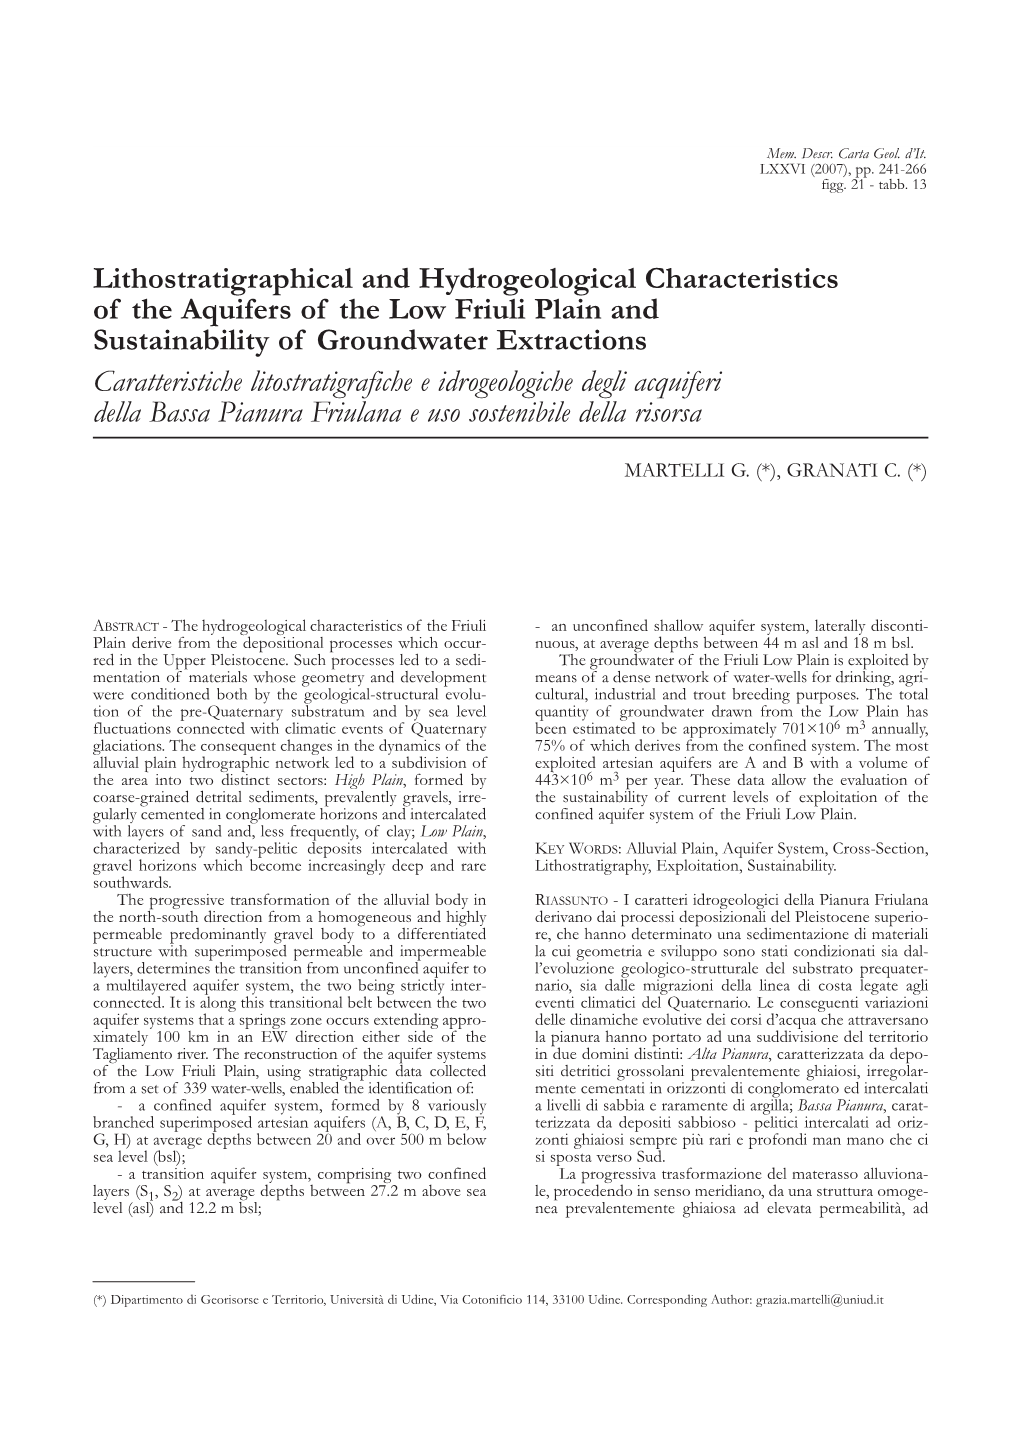 Lithostratigraphical and Hydrogeological Characteristics Of